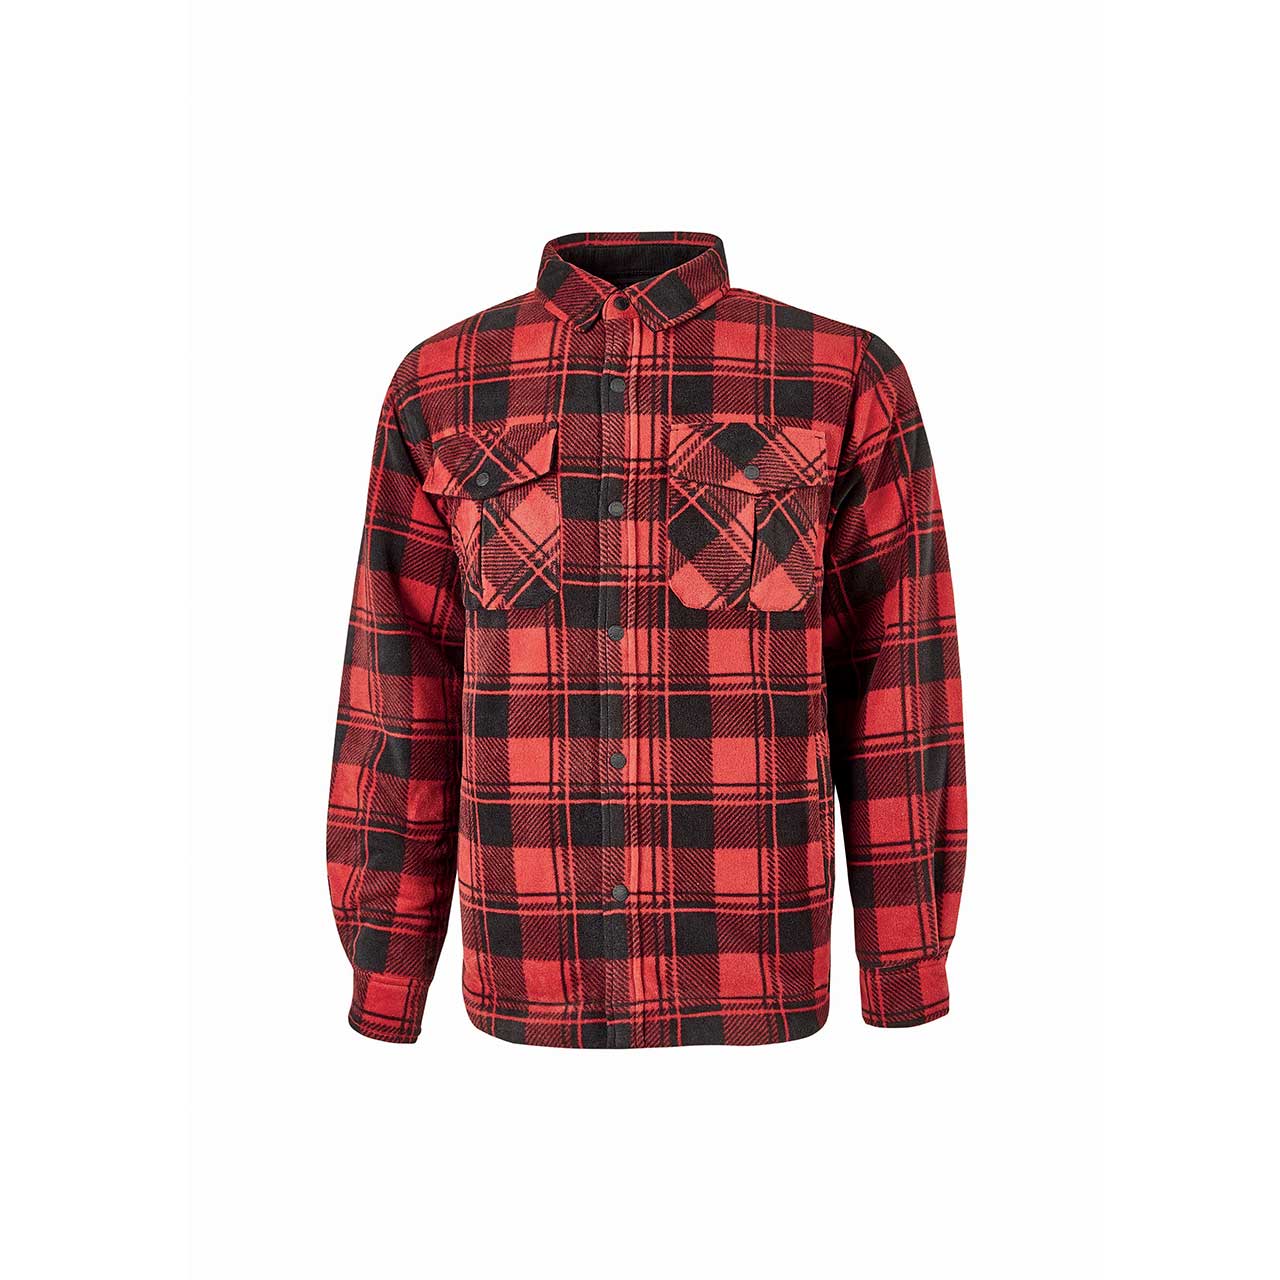 Chemise polaire de travail WILLOW Red Magma | EX273RM - Upower 0